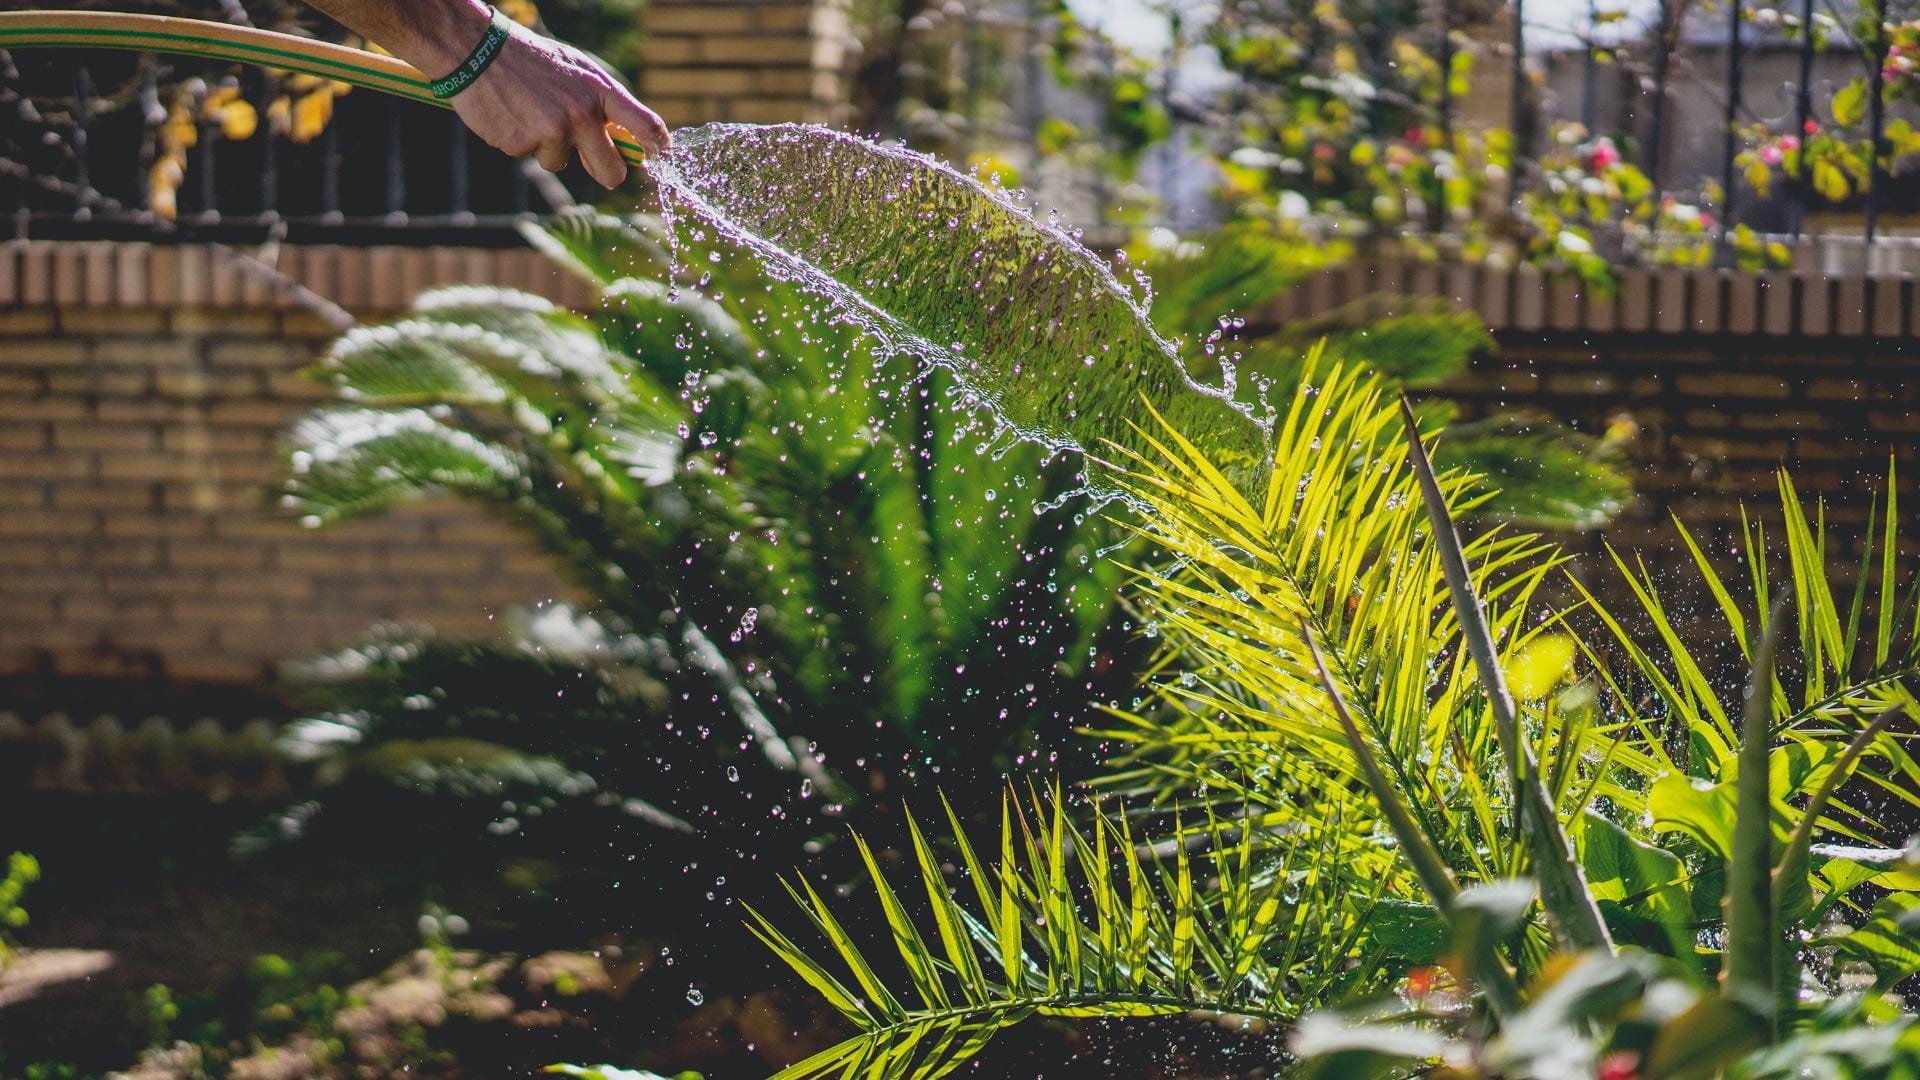 A plant in the garden being watered with a hose.